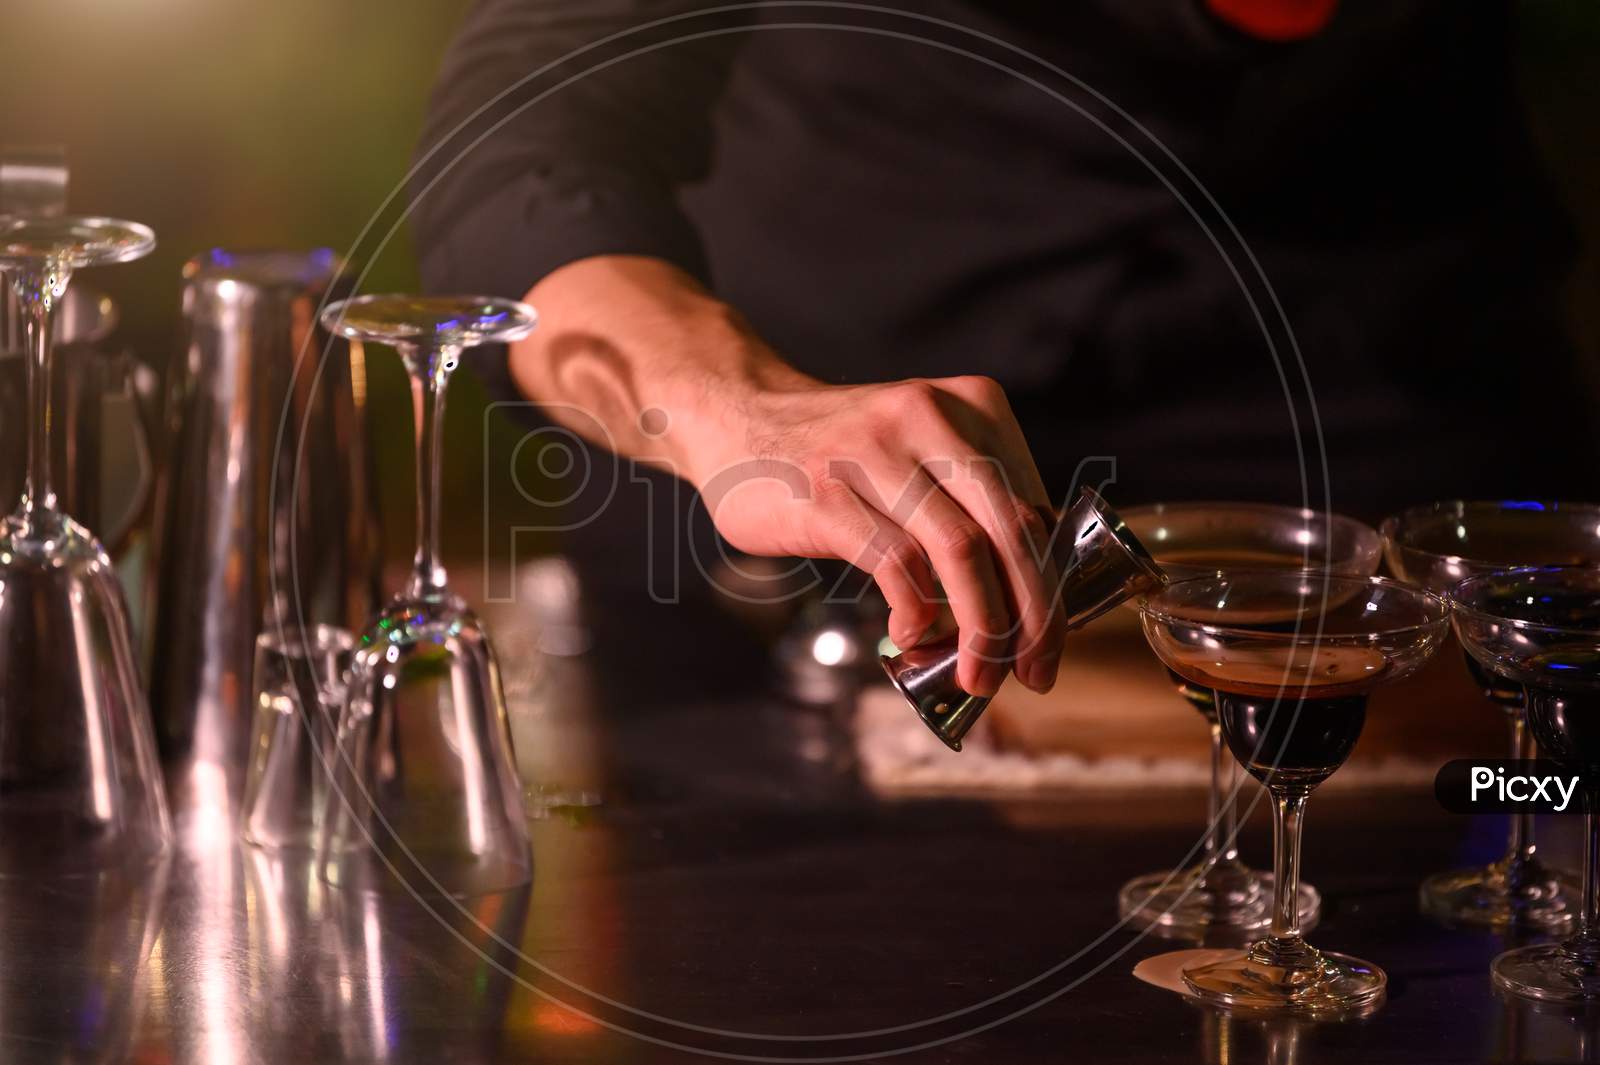 Closeup Bartender Hand Preparing Fresh Juice Cocktail In Drinking Wine Glass With Ice At Night Bar Clubbing Counter. Occupation And People Lifestyles Concept. Outdoor And Nightclub Background